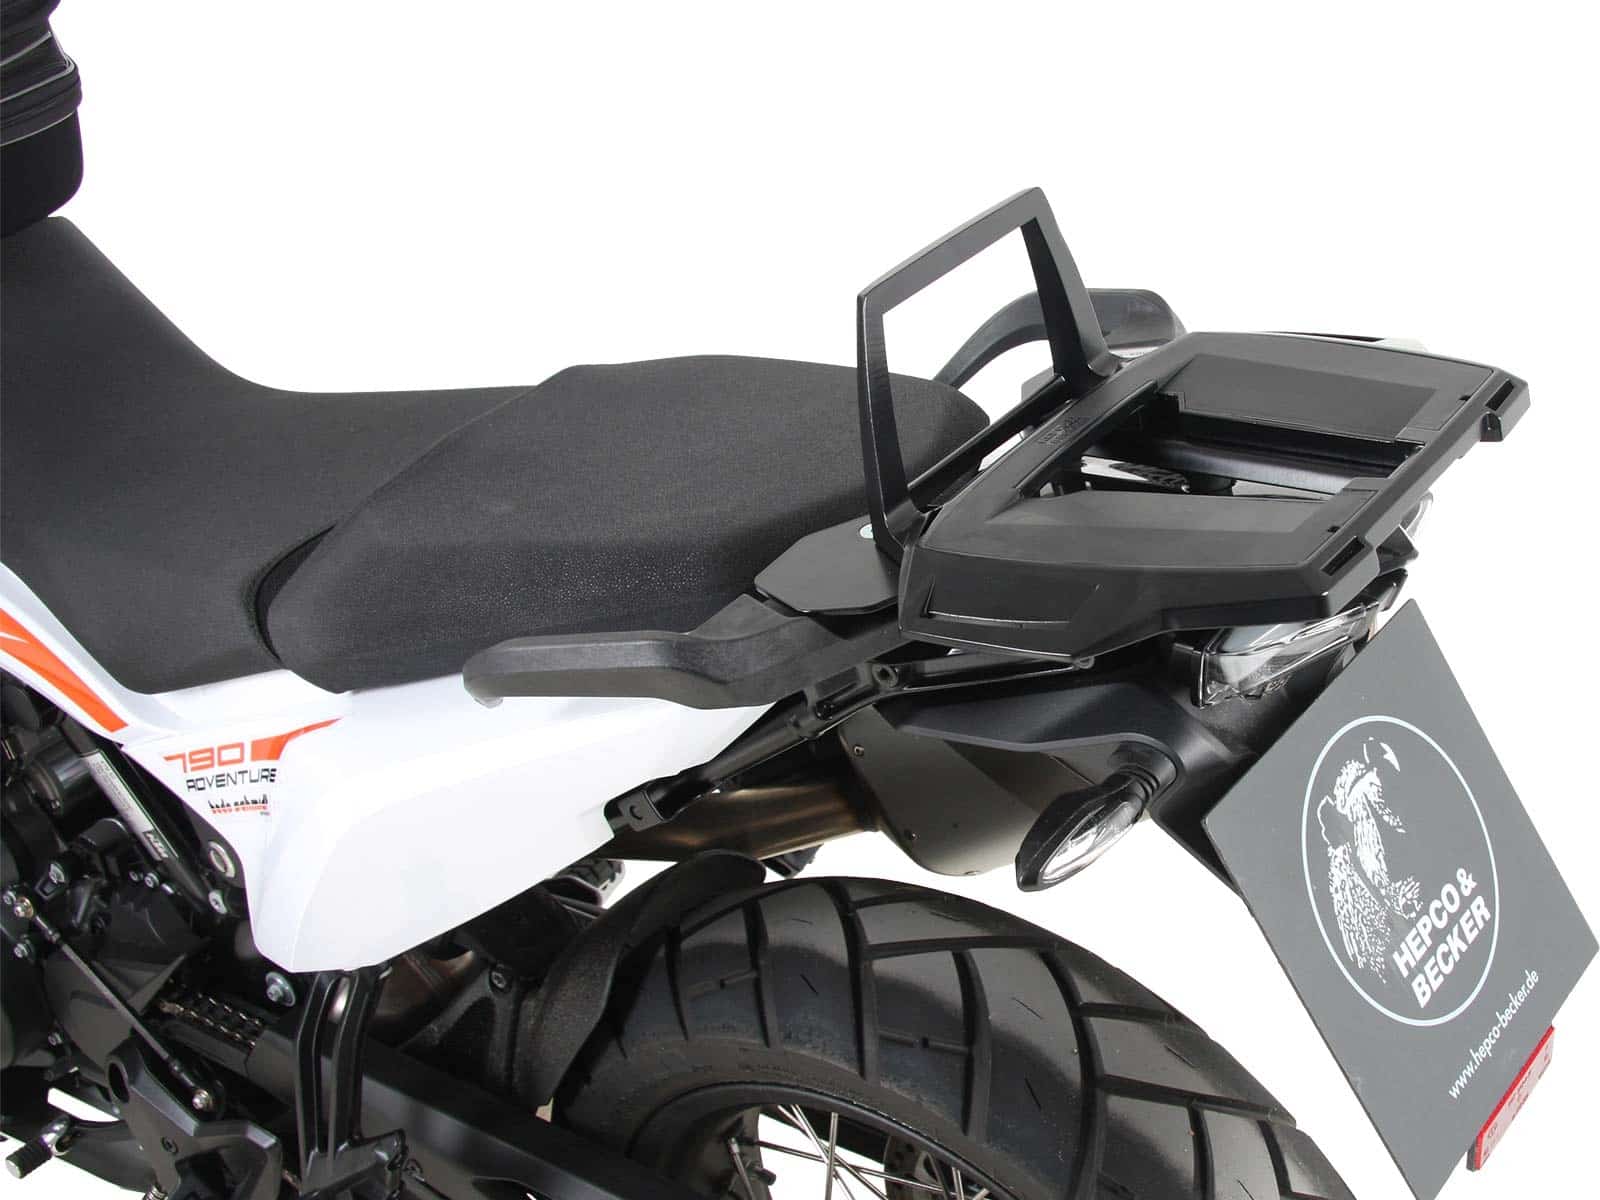 Alurack top case carrier black for combination with original rear rack for KTM 890 Adventure / R / Rally (2021-)